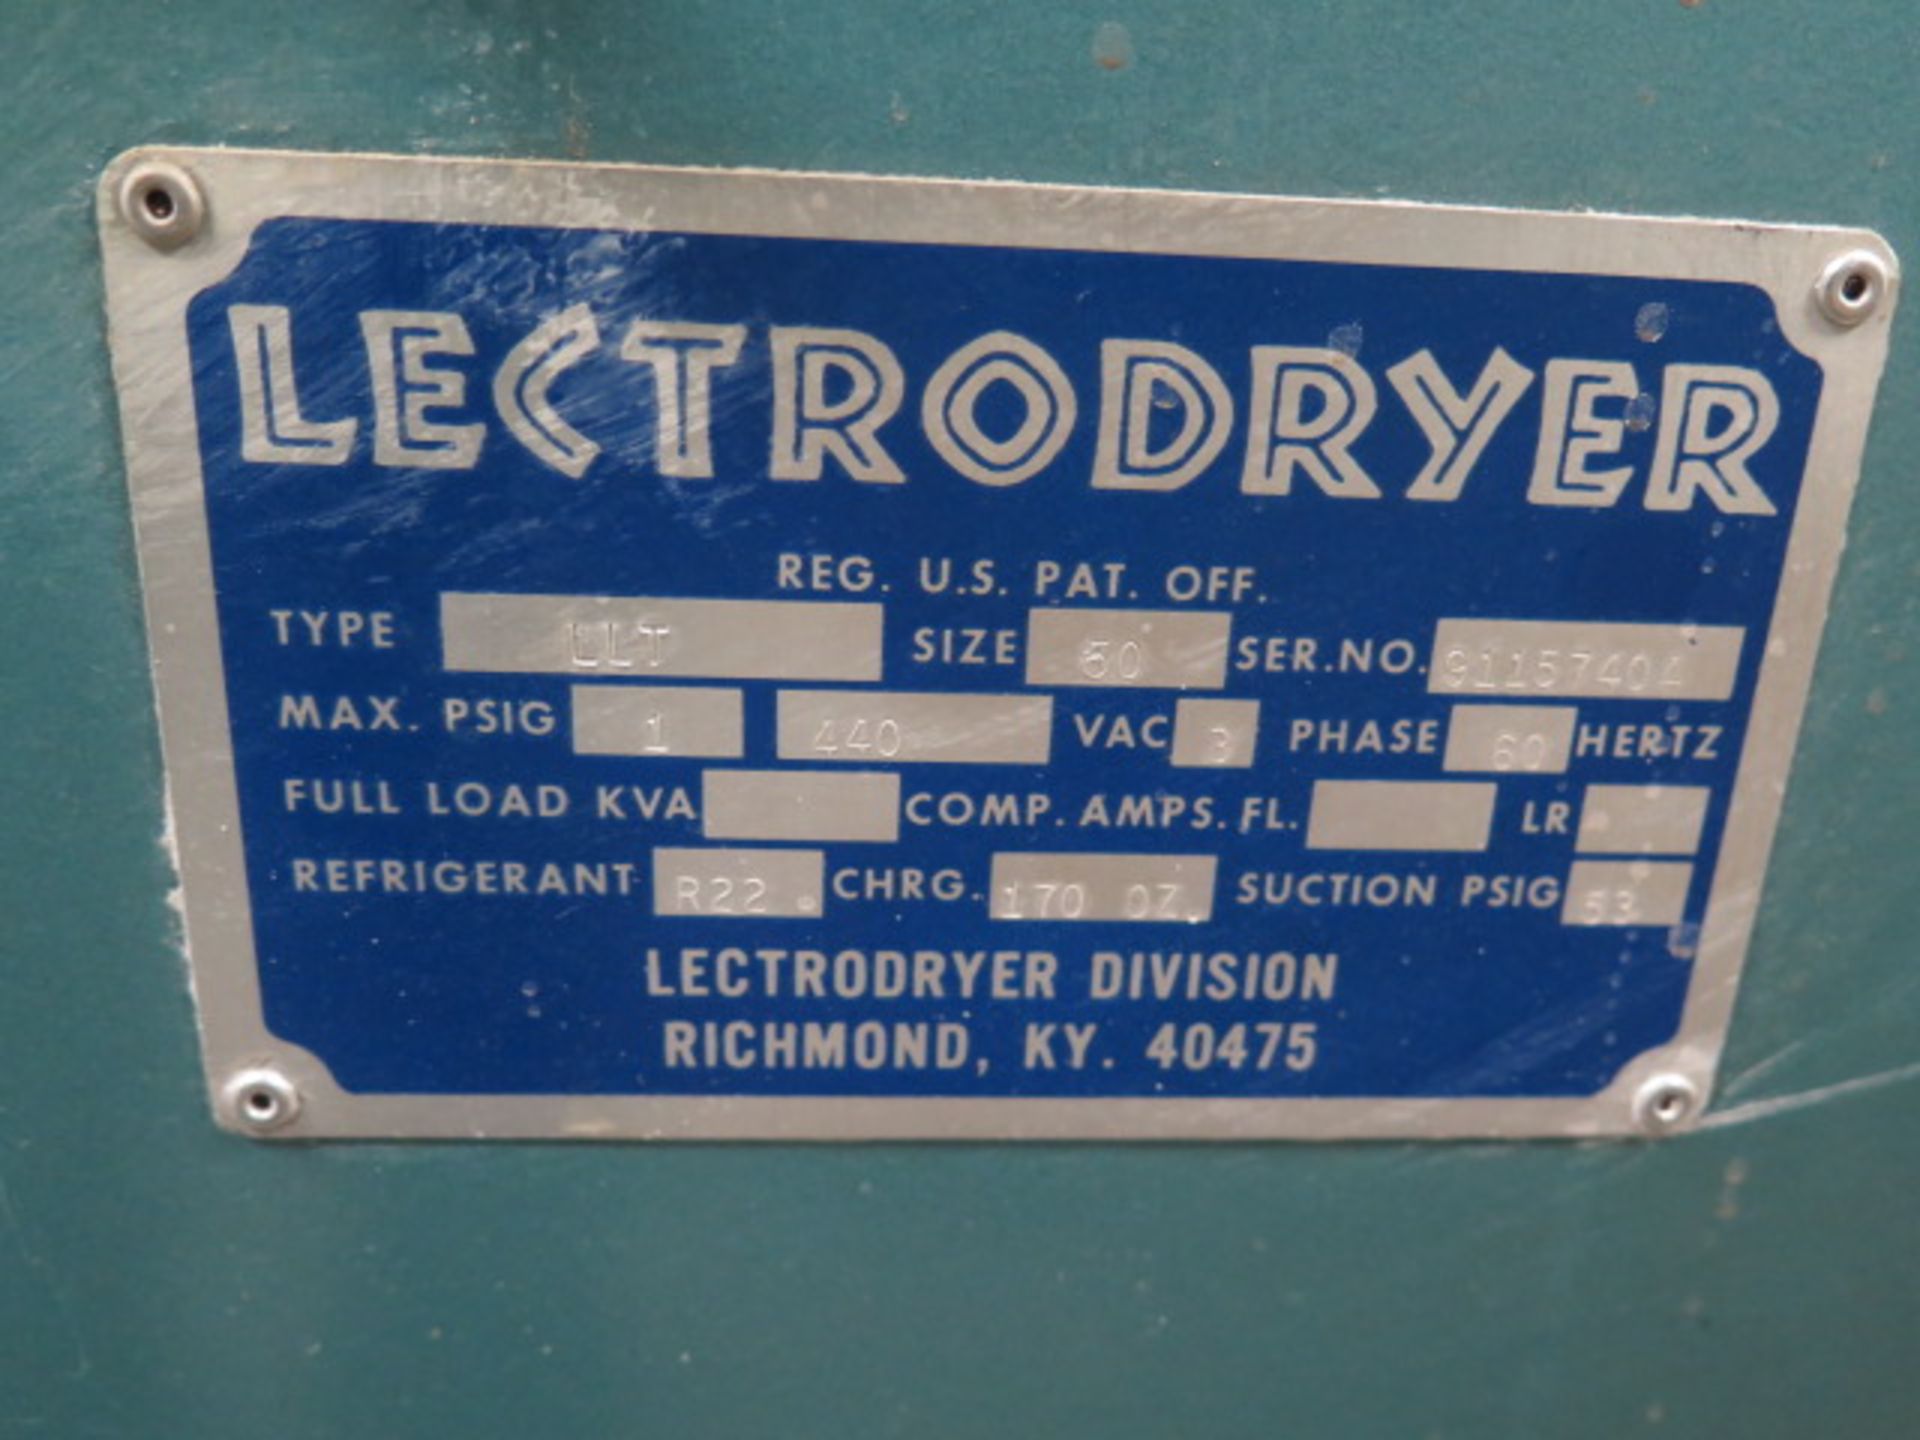 Lectrodryer type GAS-CC size 350 Dehumidifier s/n 9105J7416 and type LLT Refrigerated. SOLD AS IS - Image 6 of 10